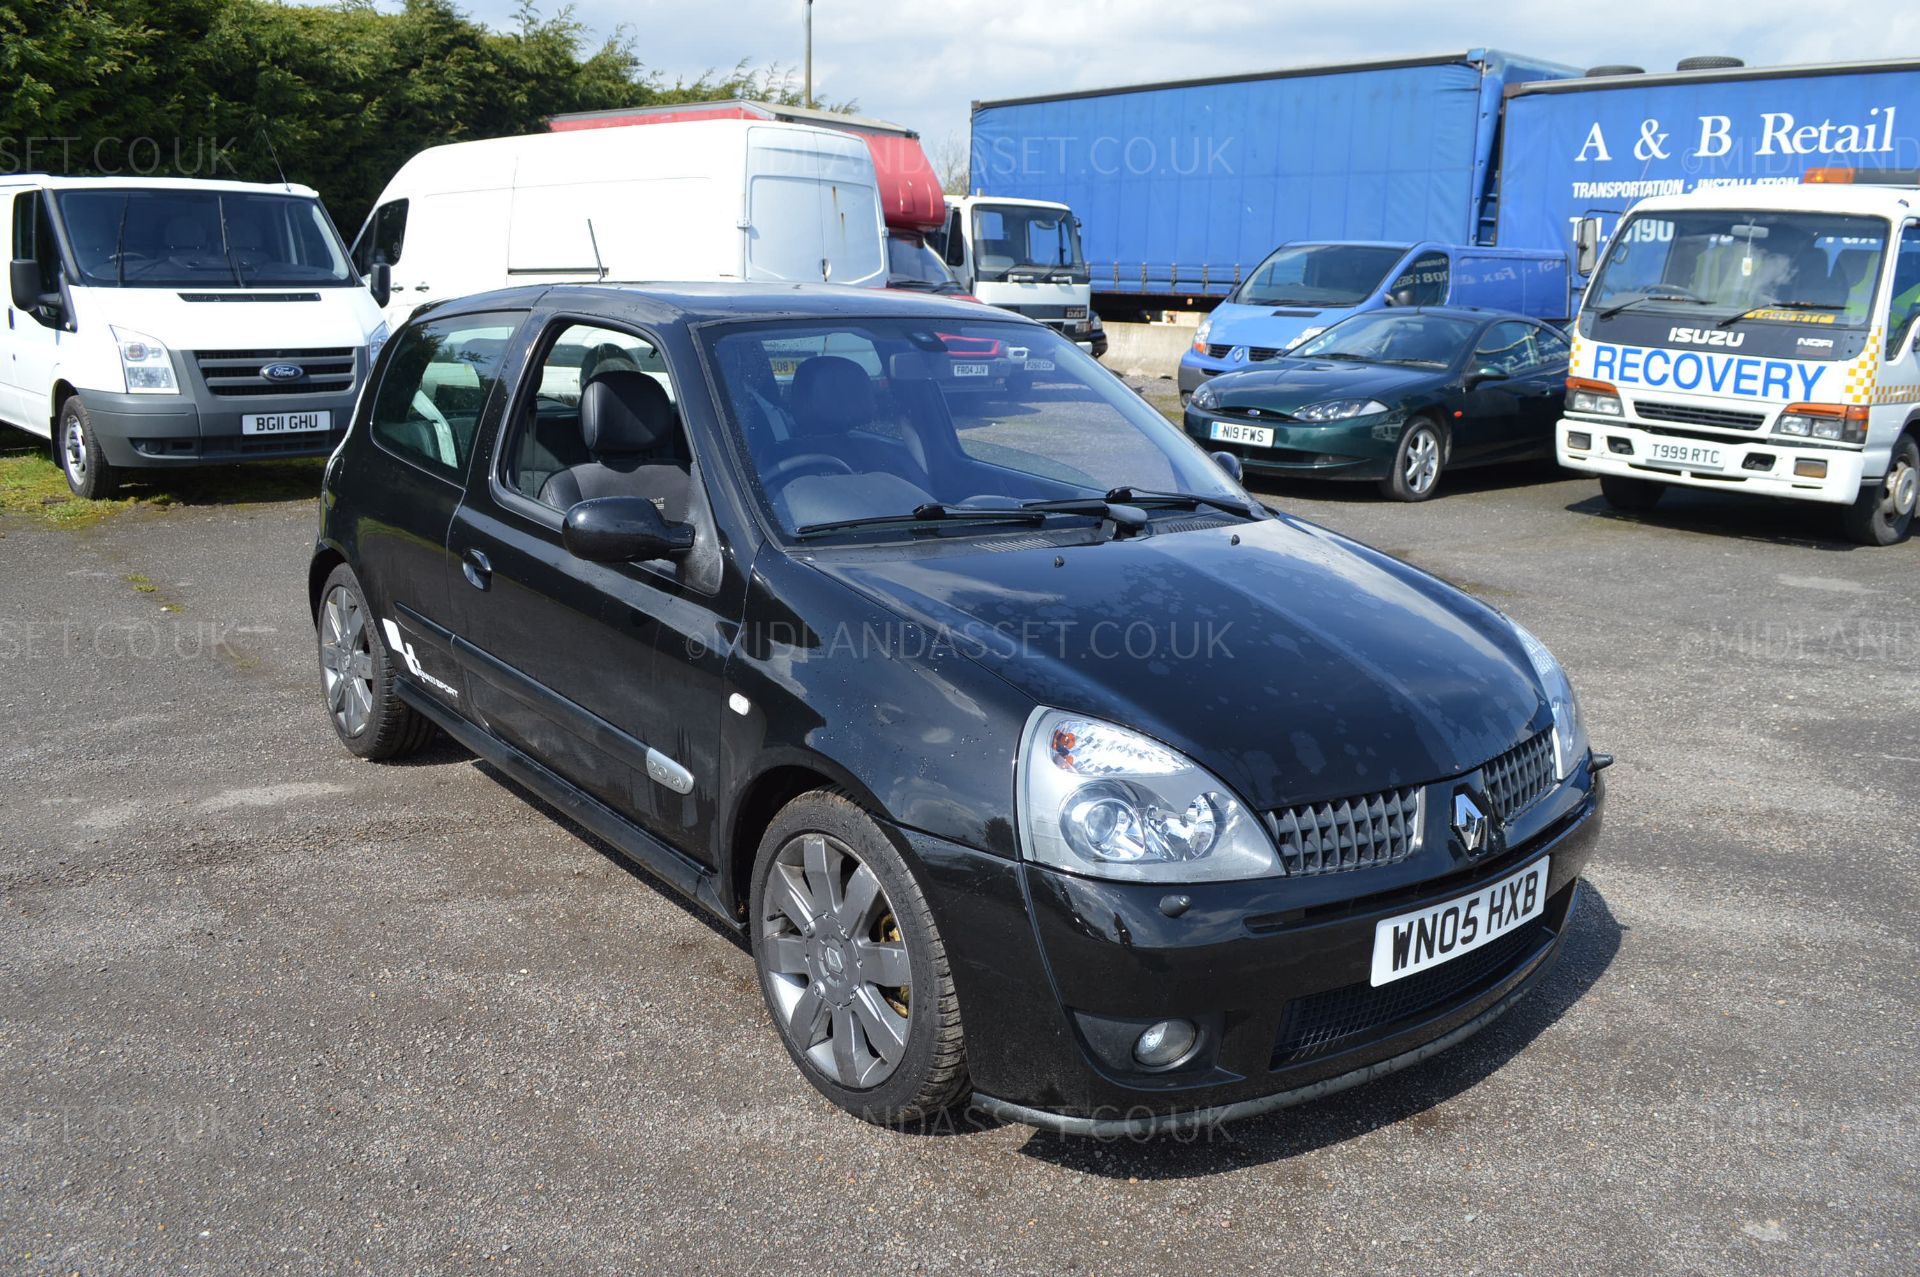 2005/05 REG RENAULT CLIO SPORT 182 16V 2.0 PETROL *NO VAT* STARTS / DRIVES WITHOUT FAULT - VERY